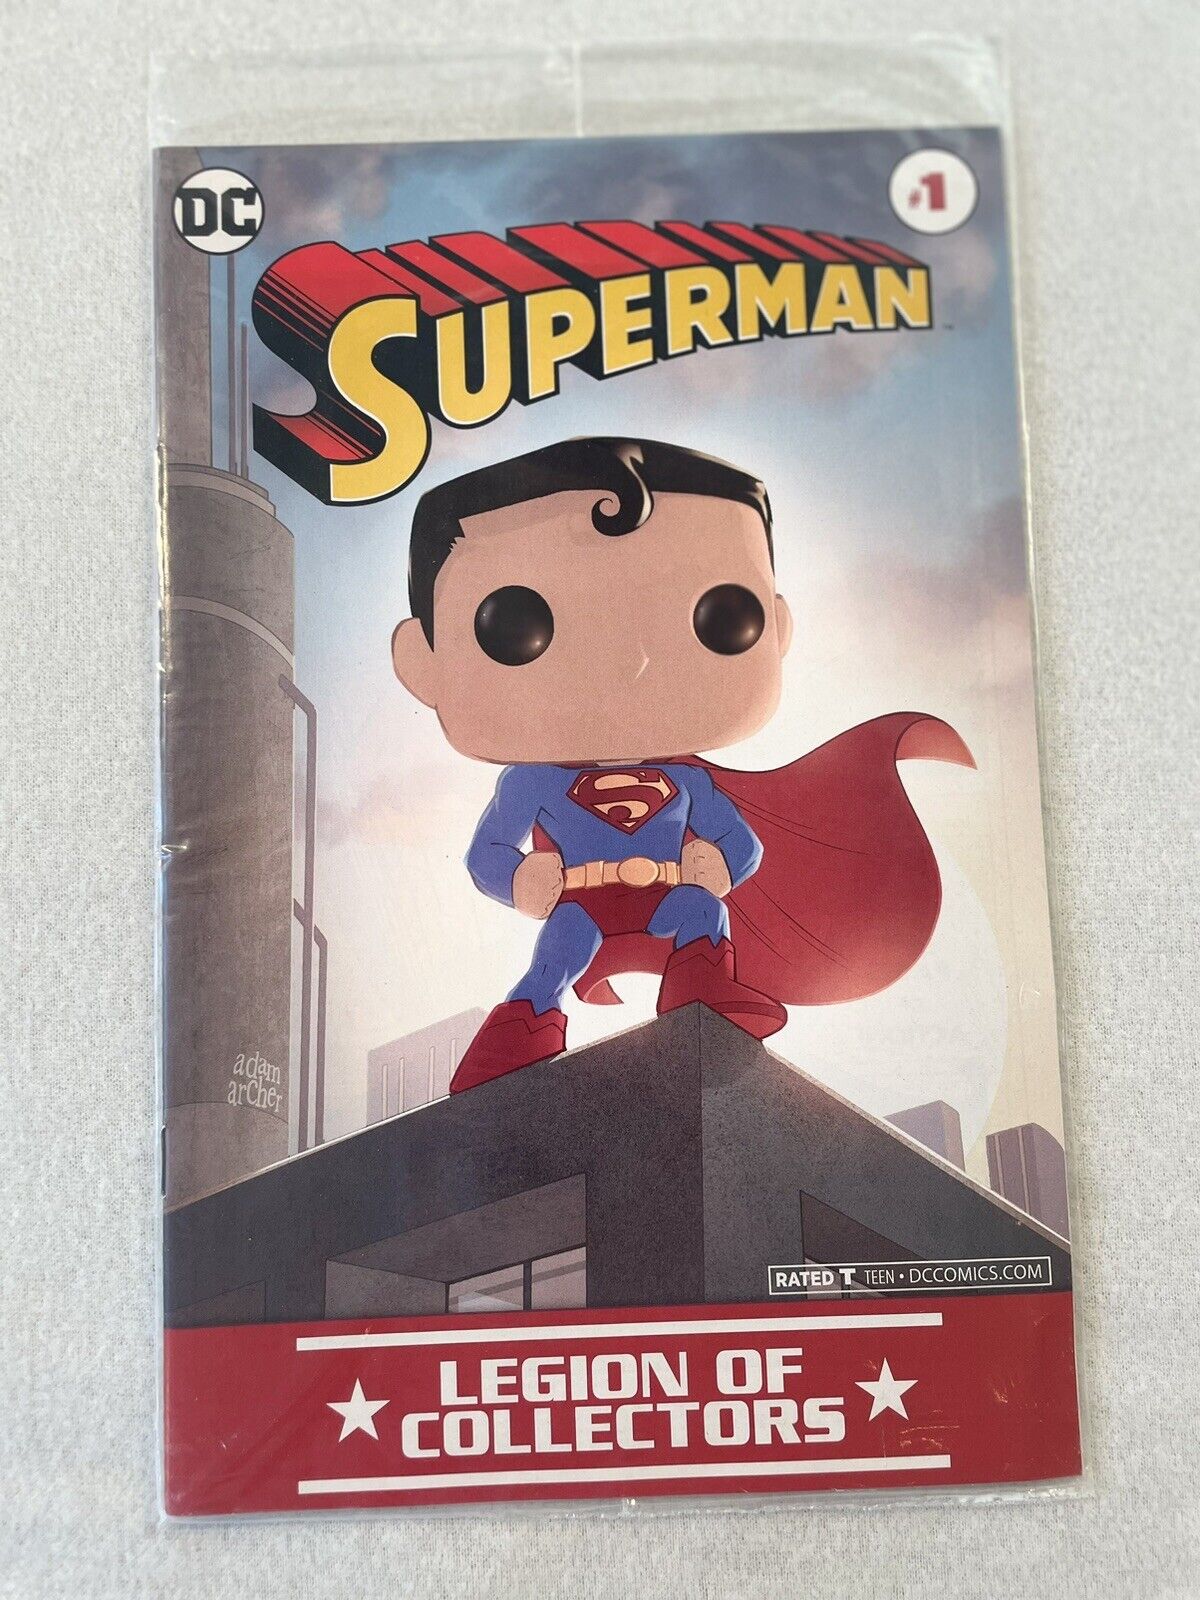 SUPERMAN #1 DC Legion of Collectors FACTORY SEALED Funko Varian Comic 2016 NEW